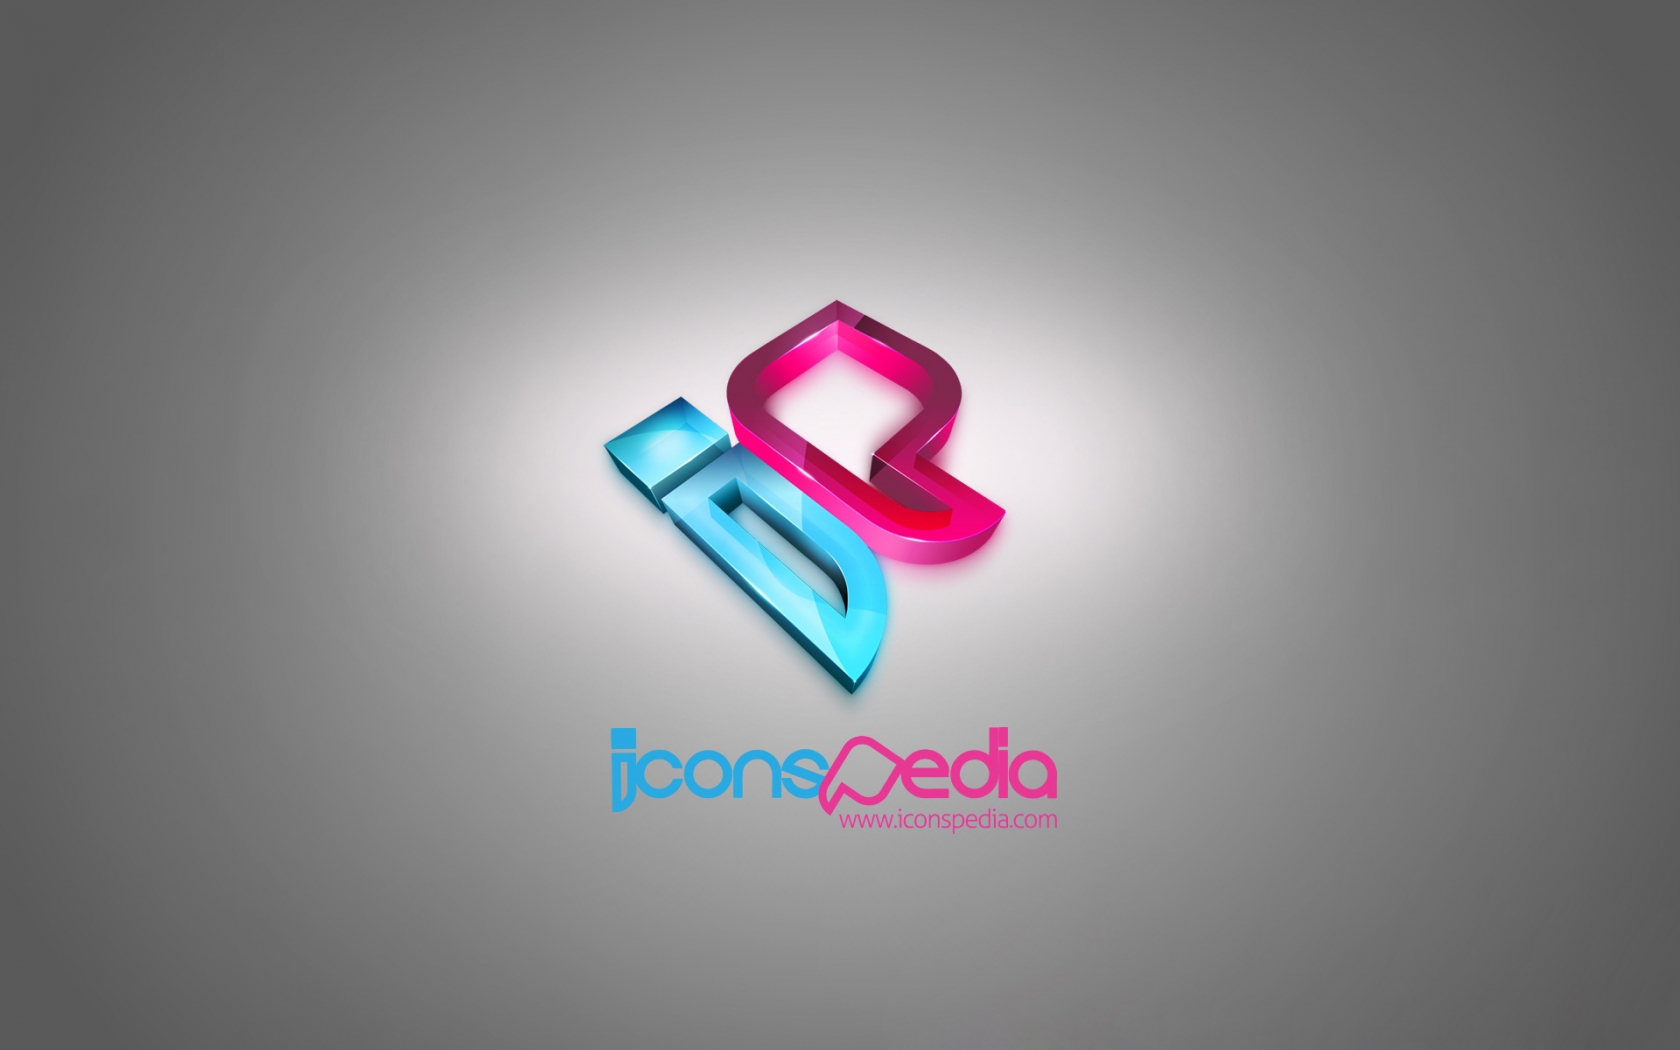 Iconspedia Logo for 1680 x 1050 widescreen resolution